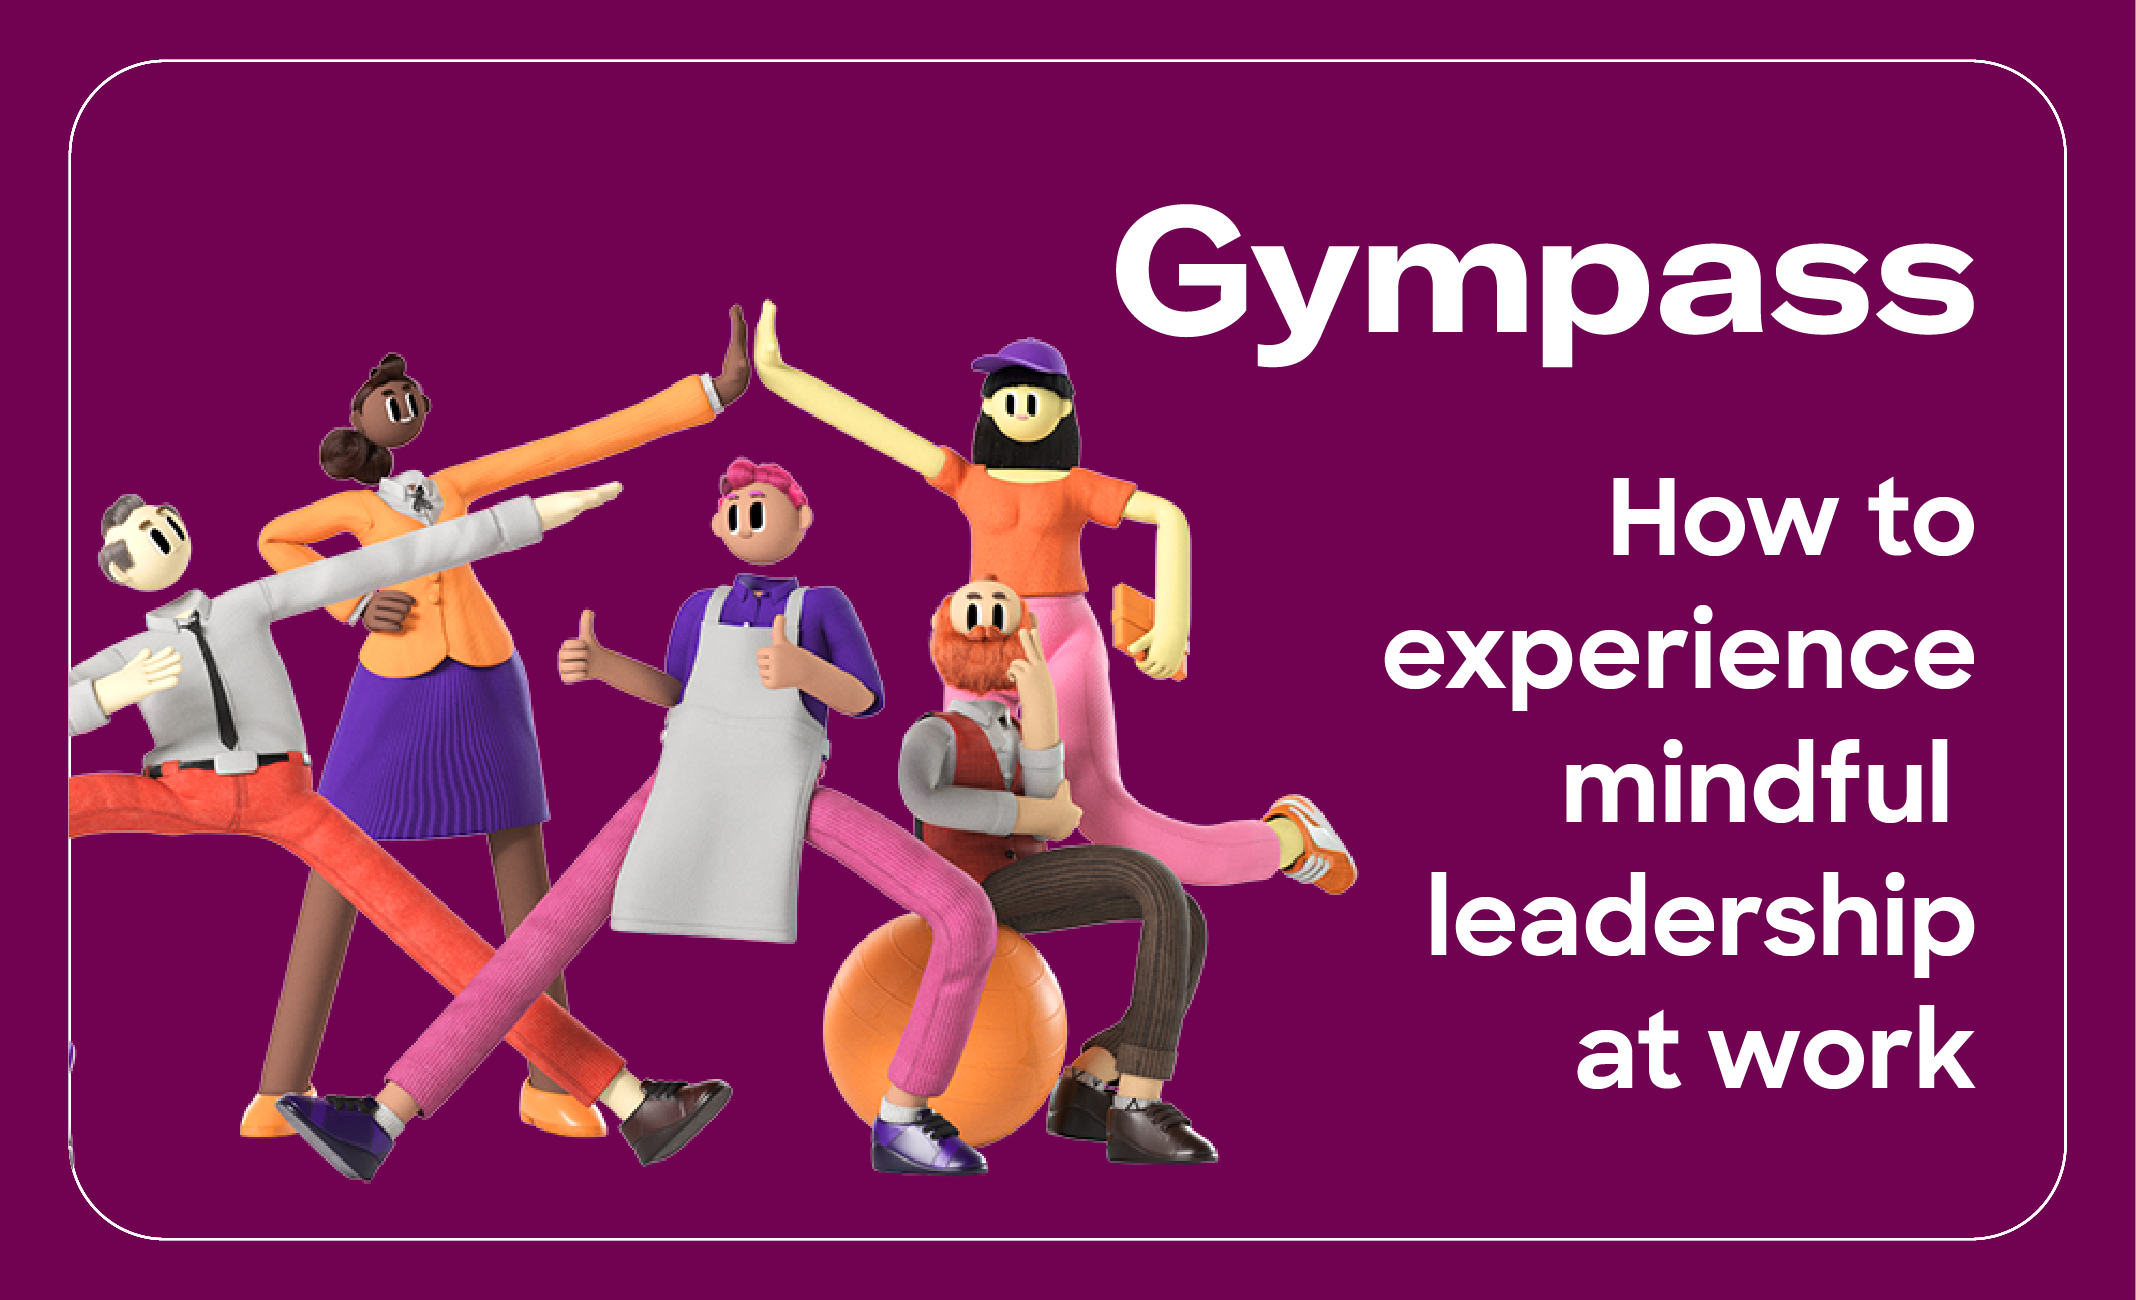 Gympass Guide: How to experience mindful leadership at work 